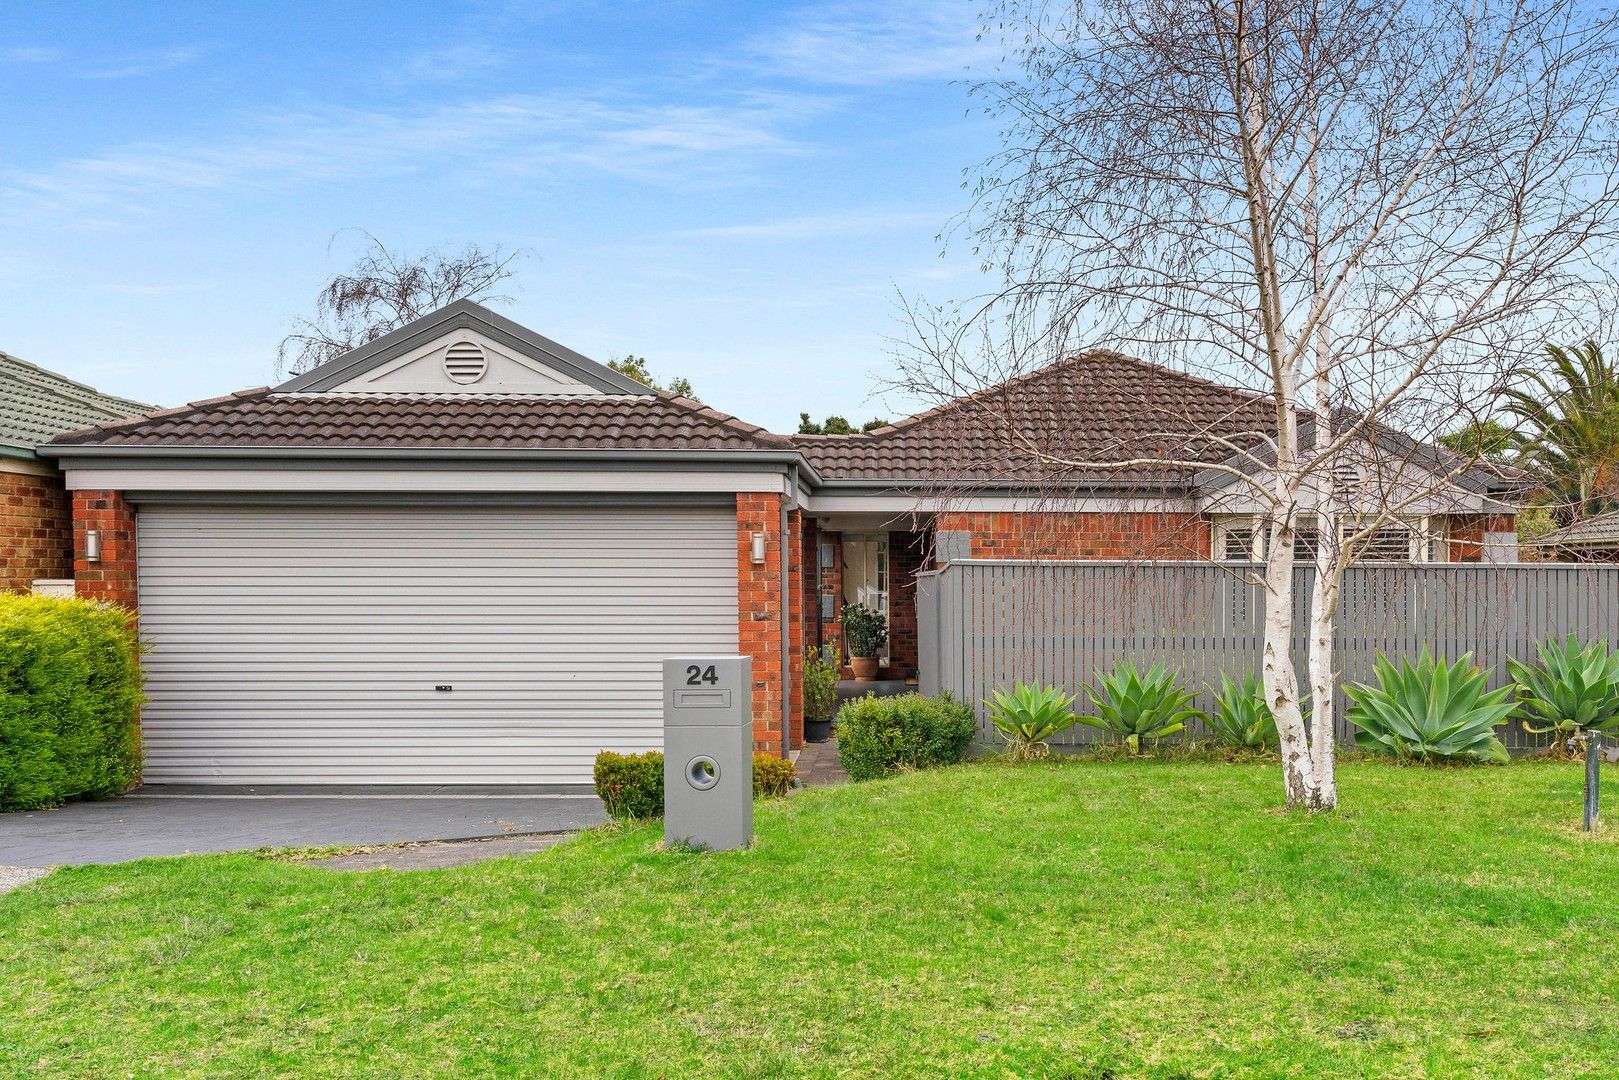 3 bedrooms House in 24 Parkside Crescent MORNINGTON VIC, 3931